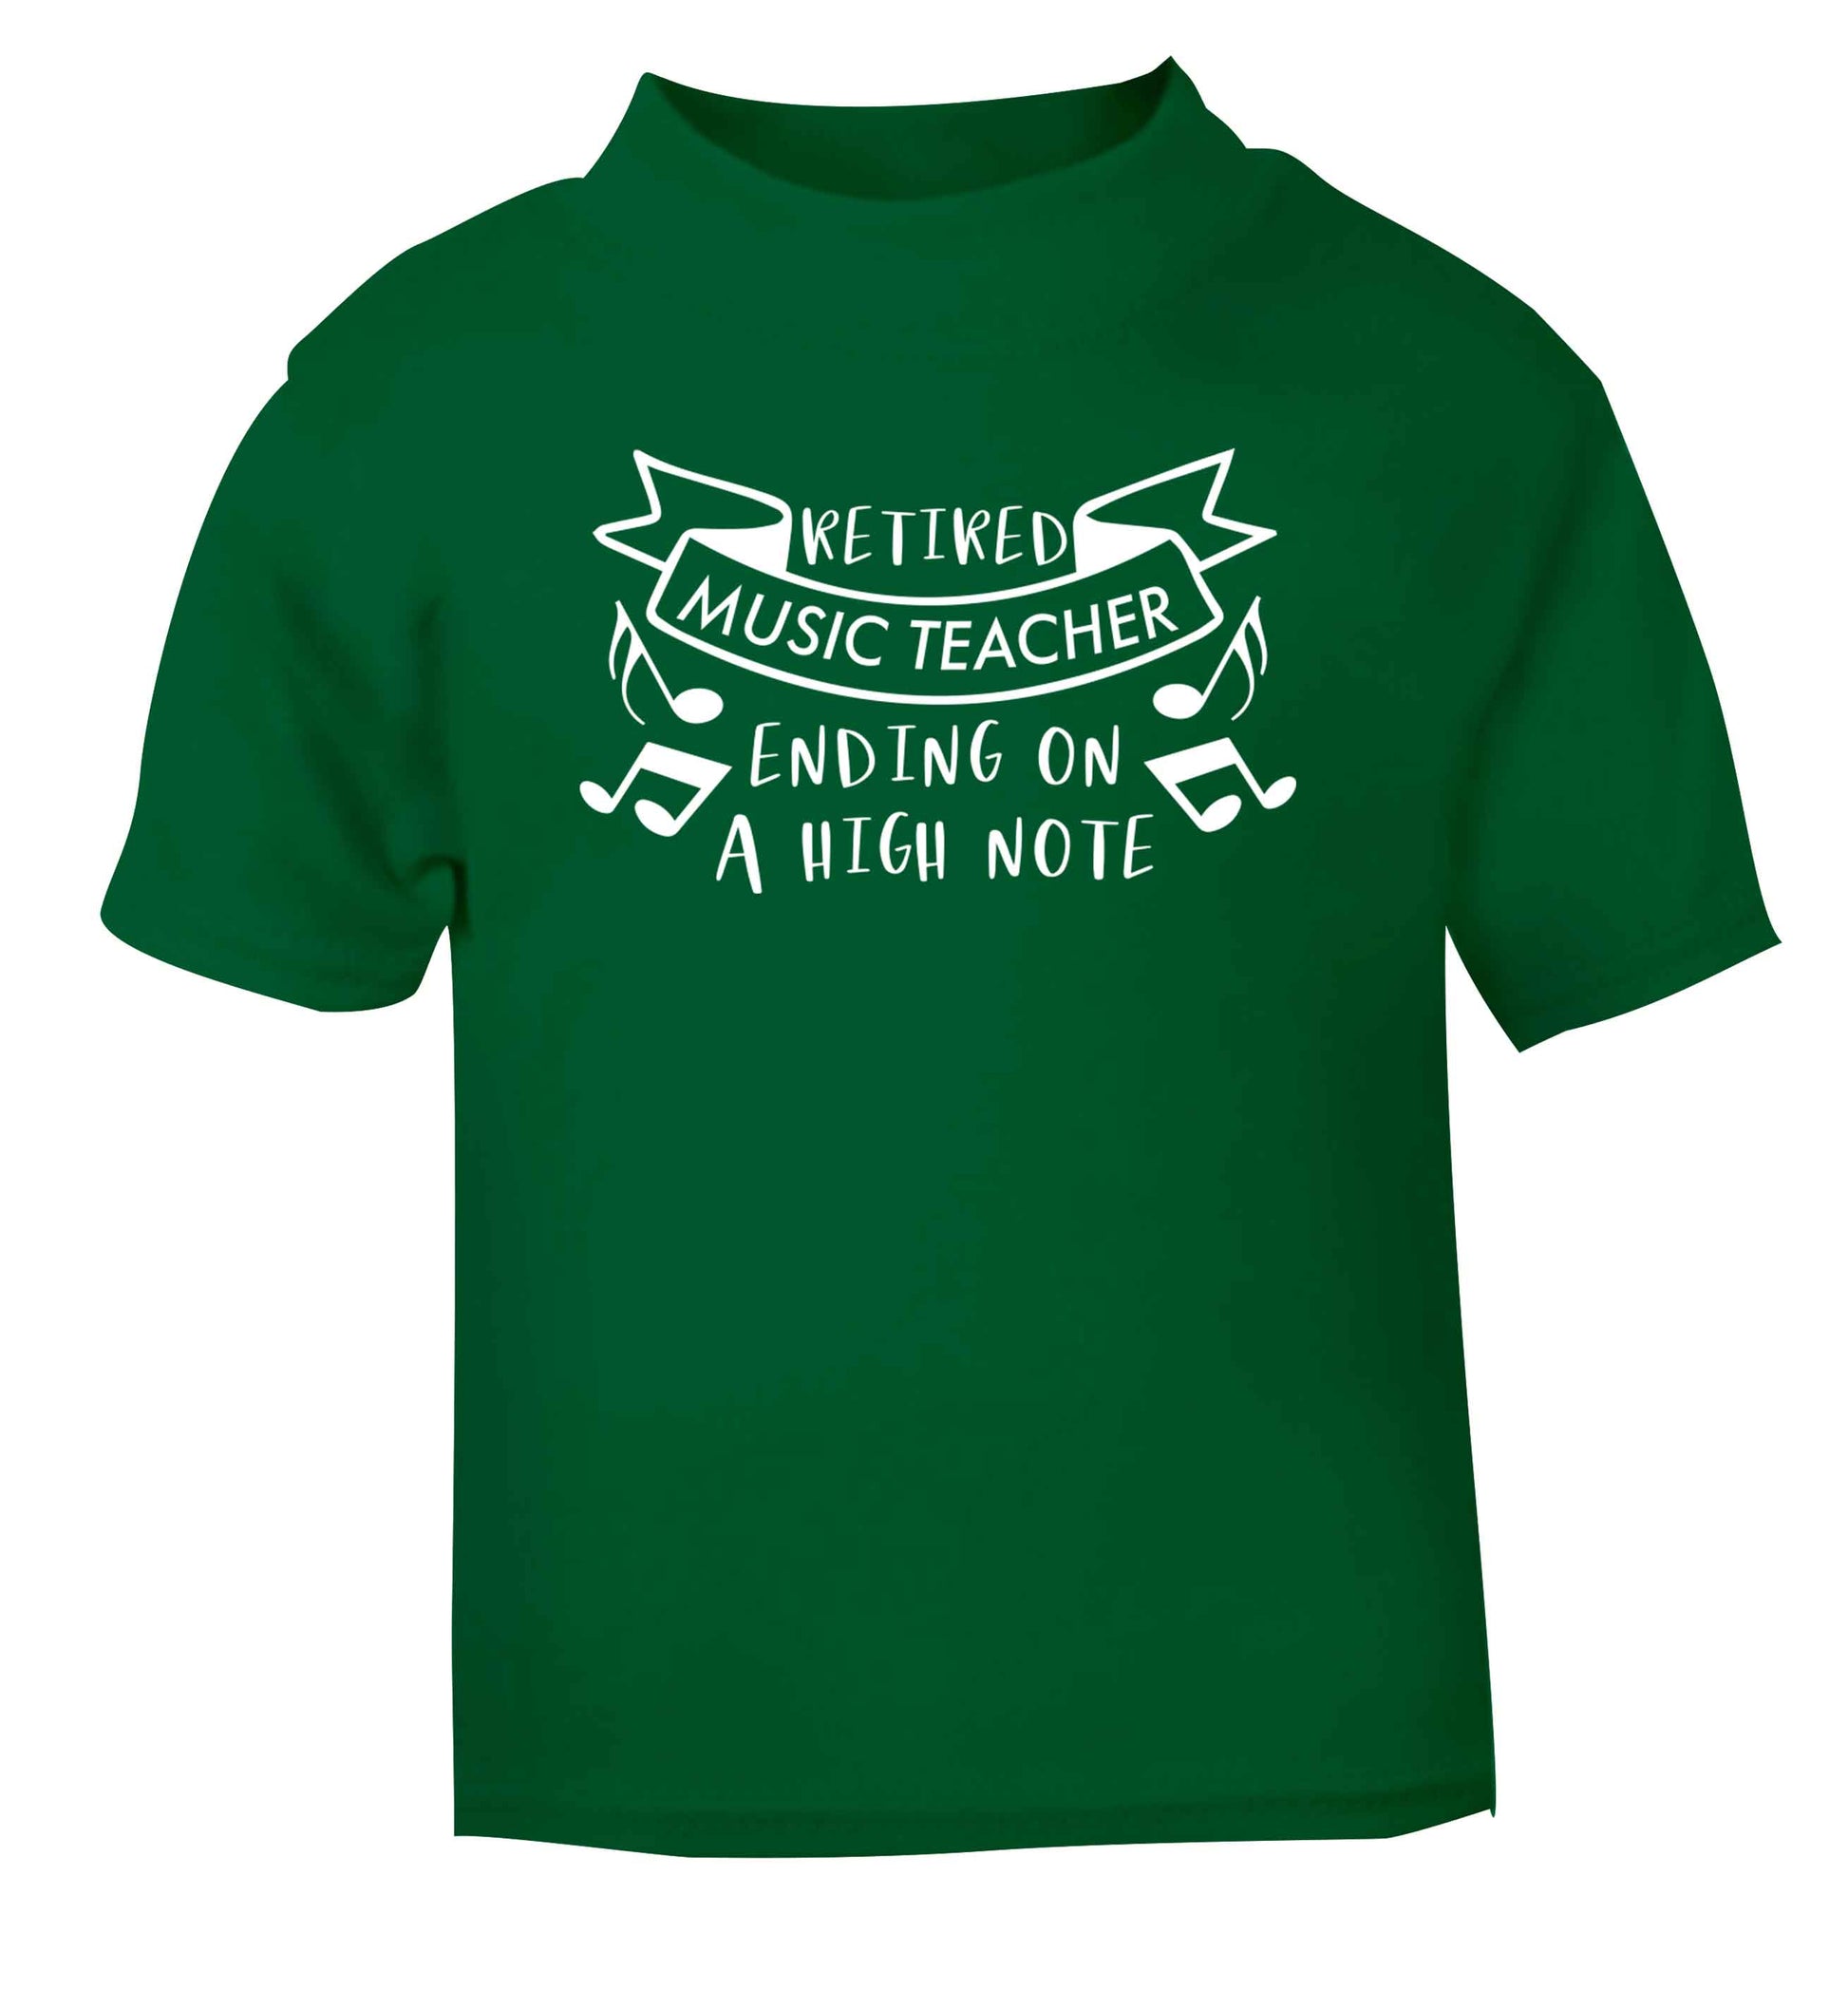 Retired music teacher ending on a high note green Baby Toddler Tshirt 2 Years